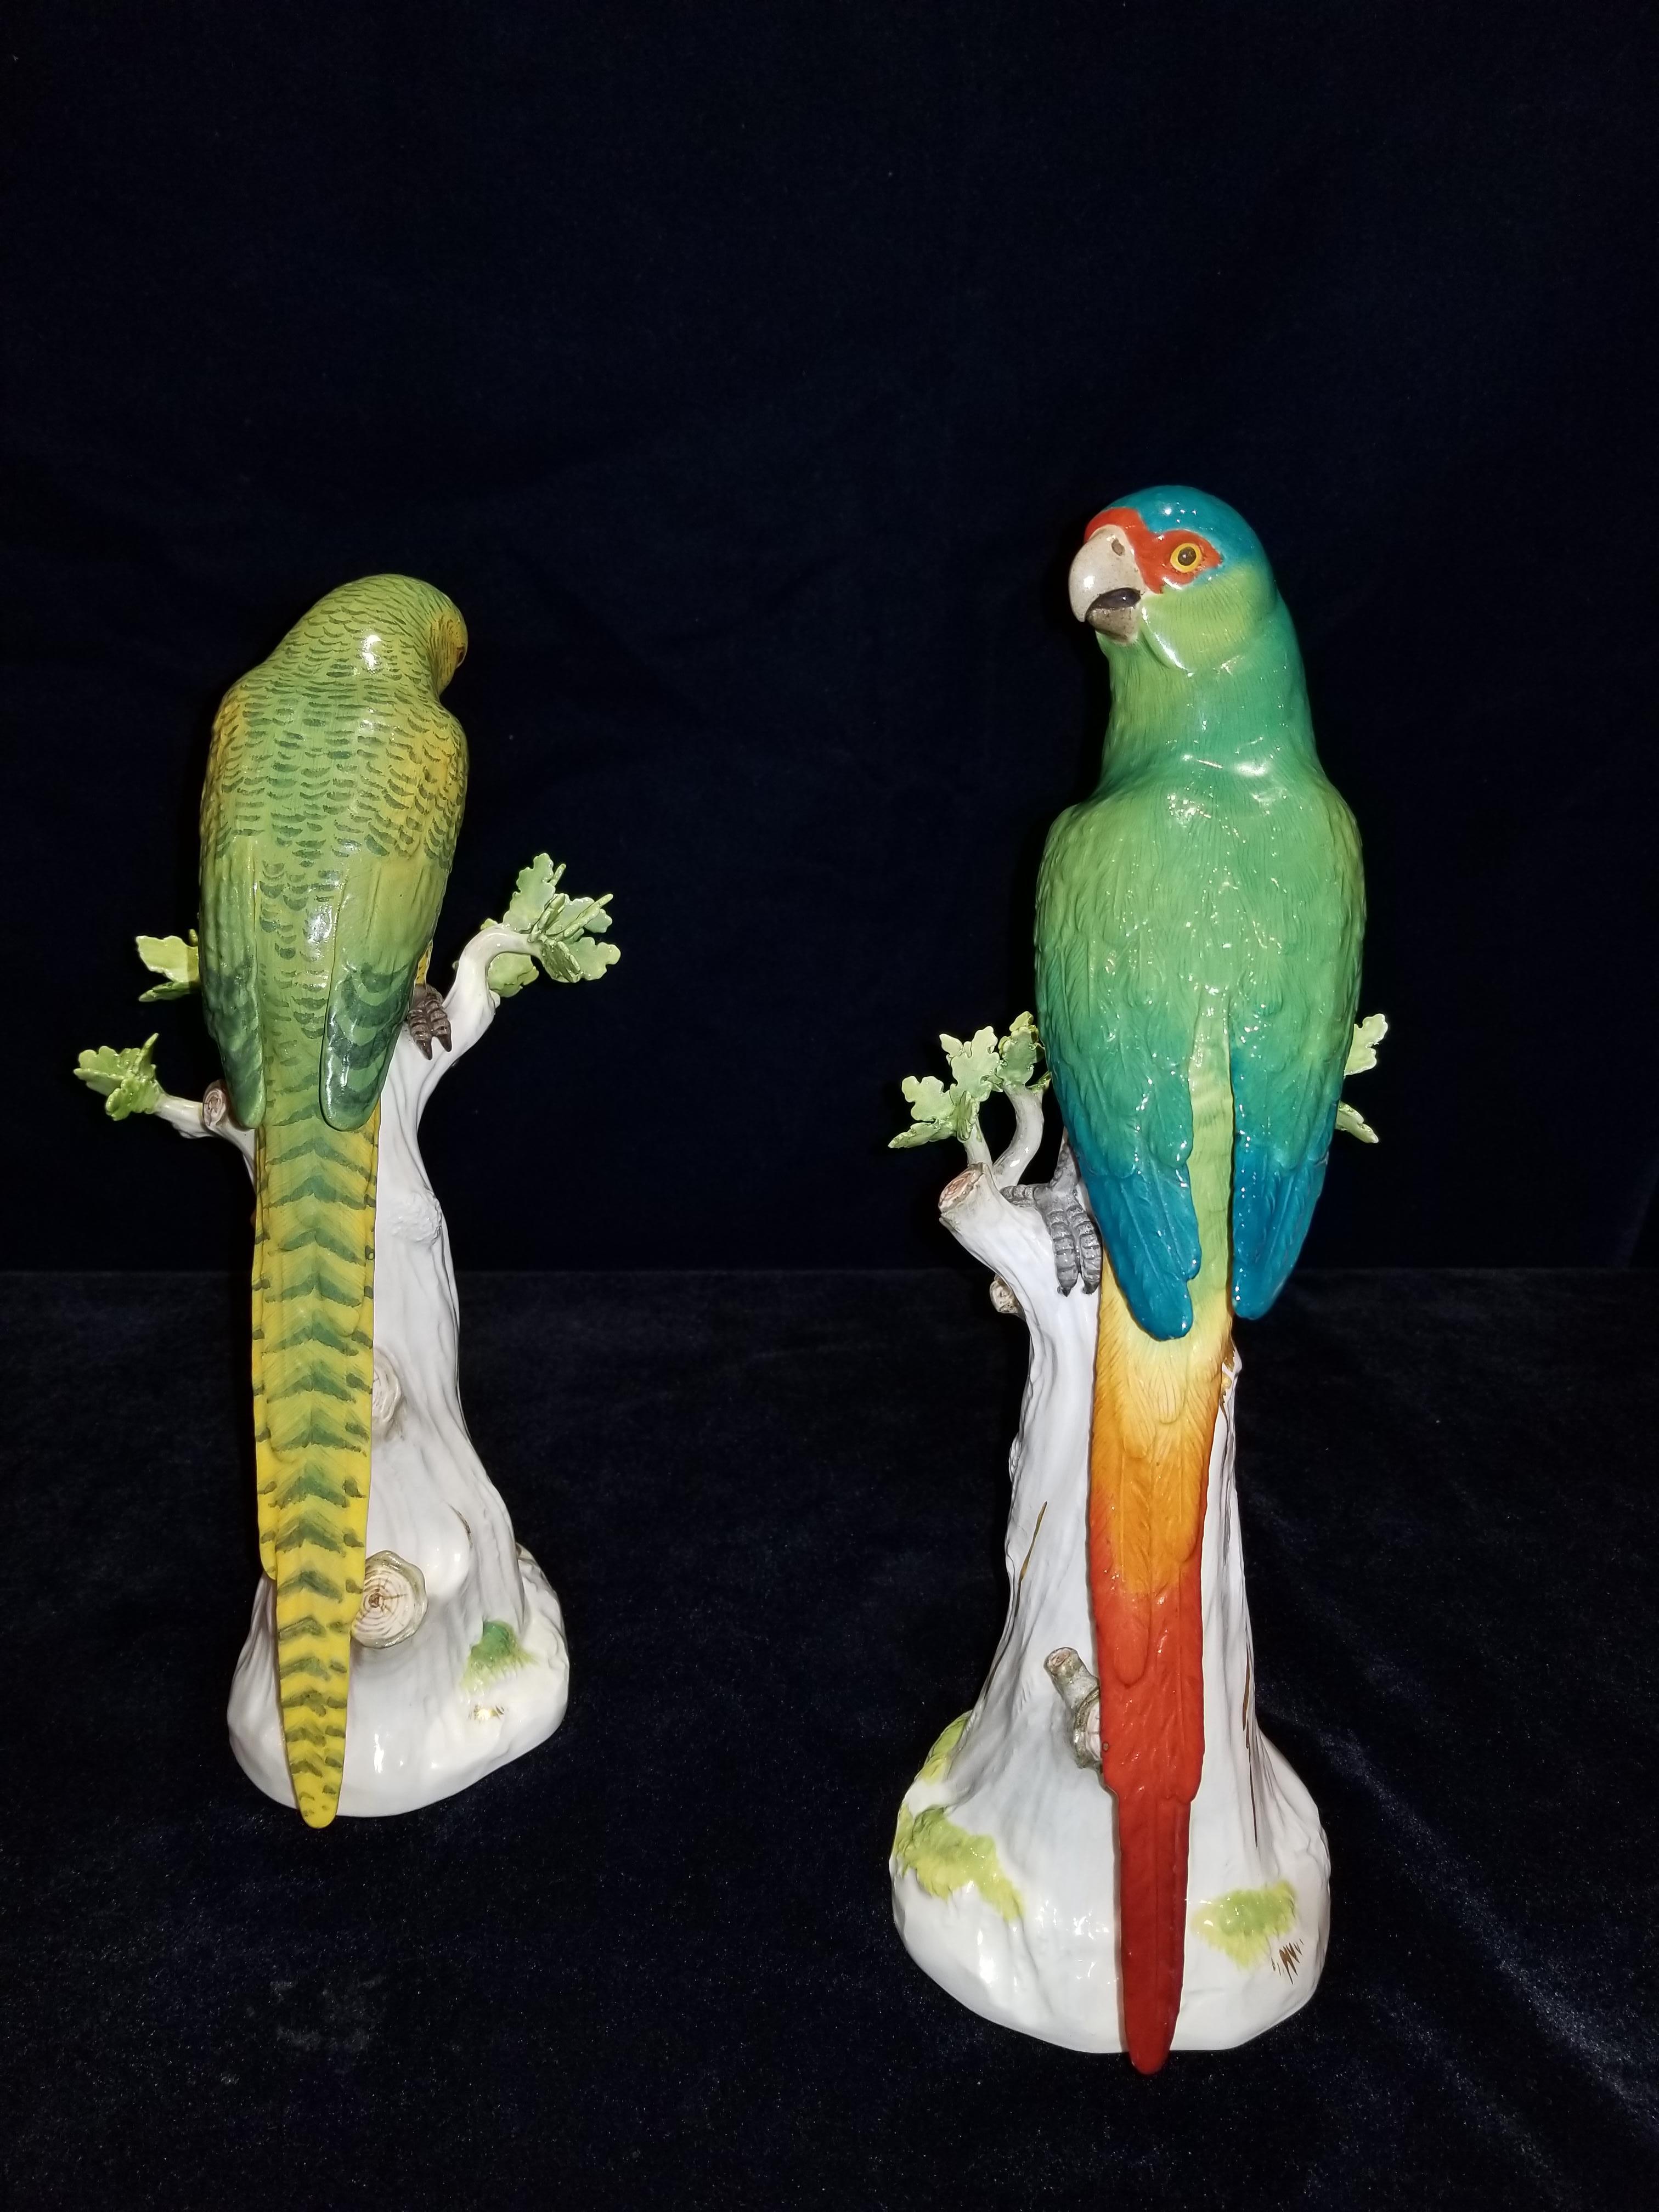 Rococo Meissen Porcelain Figures of Parrots Standing on Tree Branches with Leaves, Pair